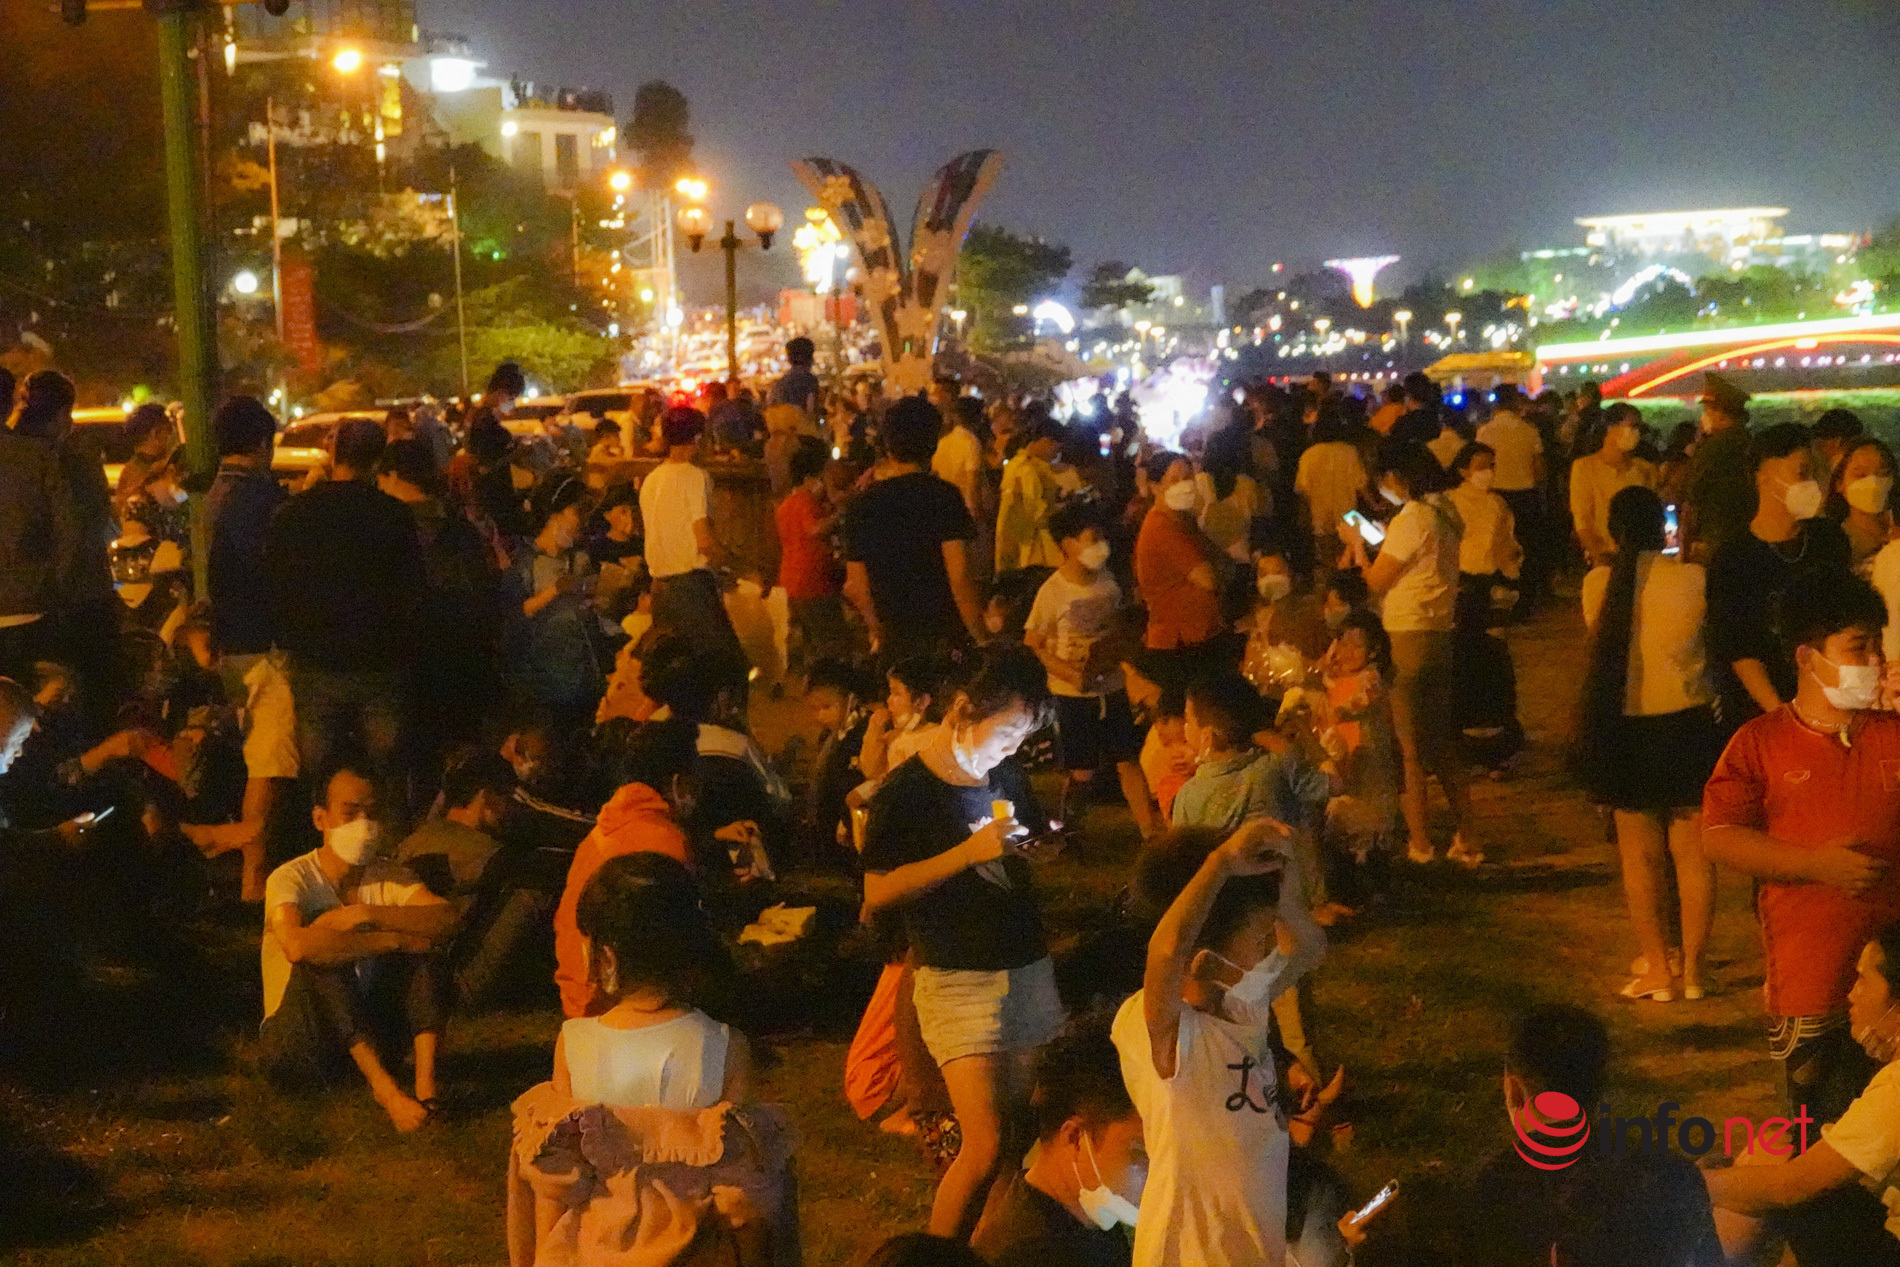 Phu Tho: Thousands of people flocked to Van Lang Park to watch fireworks early, the streets were packed